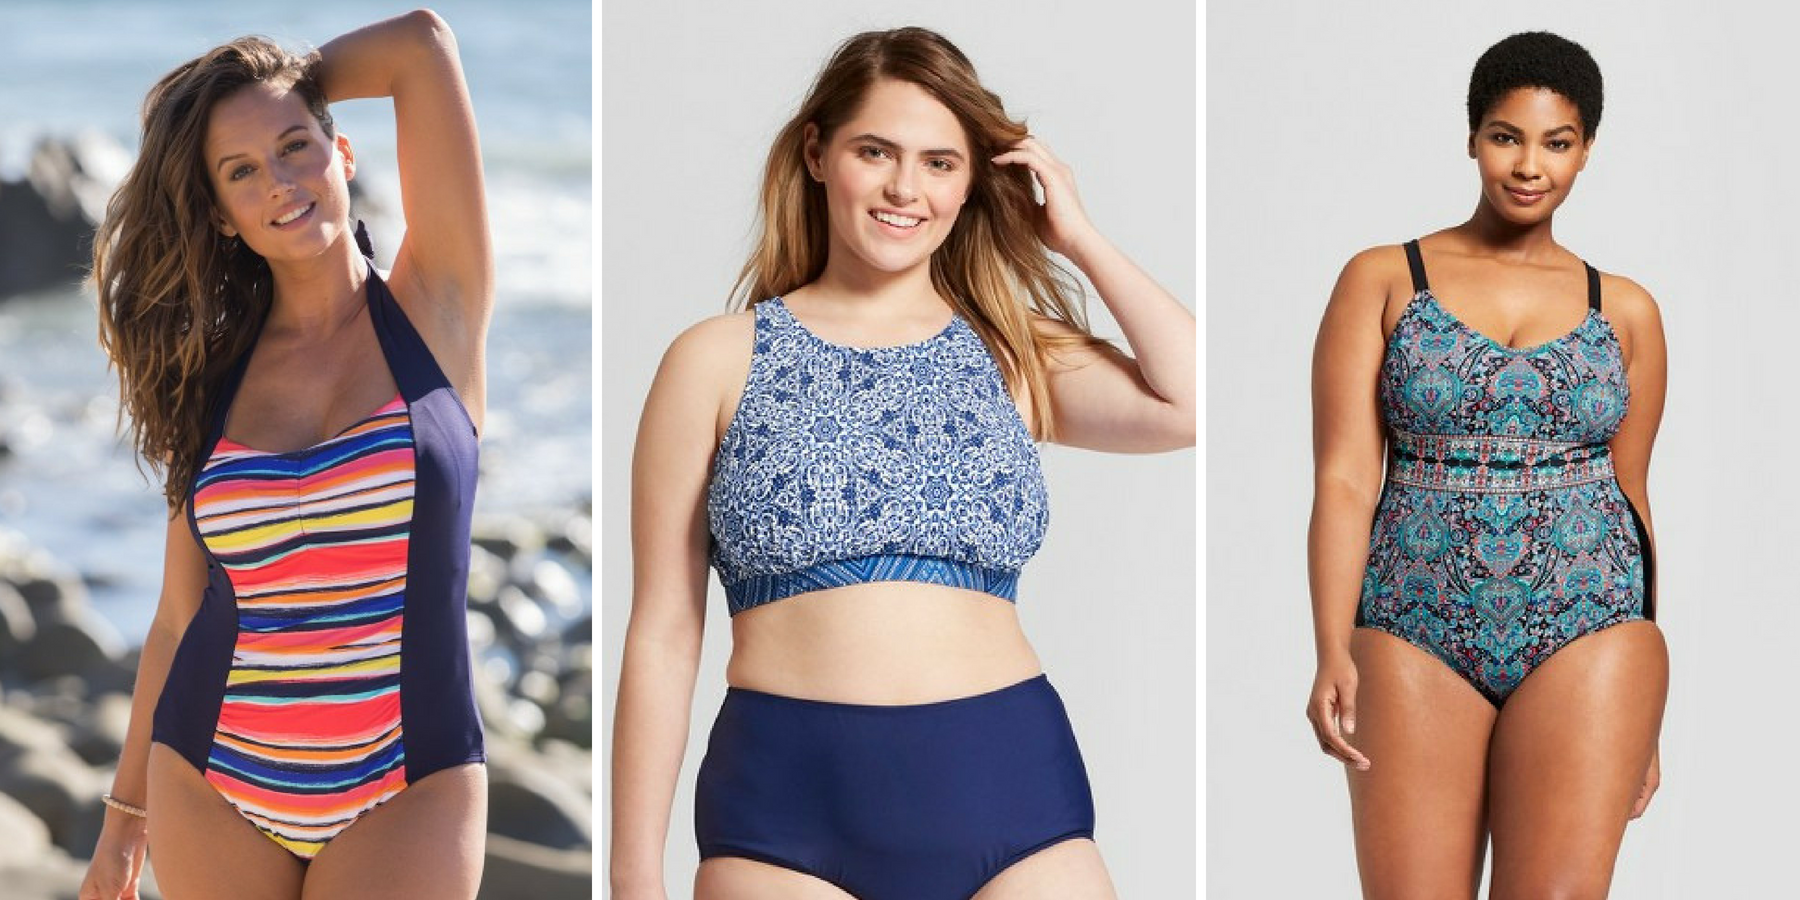 Ipswich Swimsuit Inspiration and Color Blocking Ideas